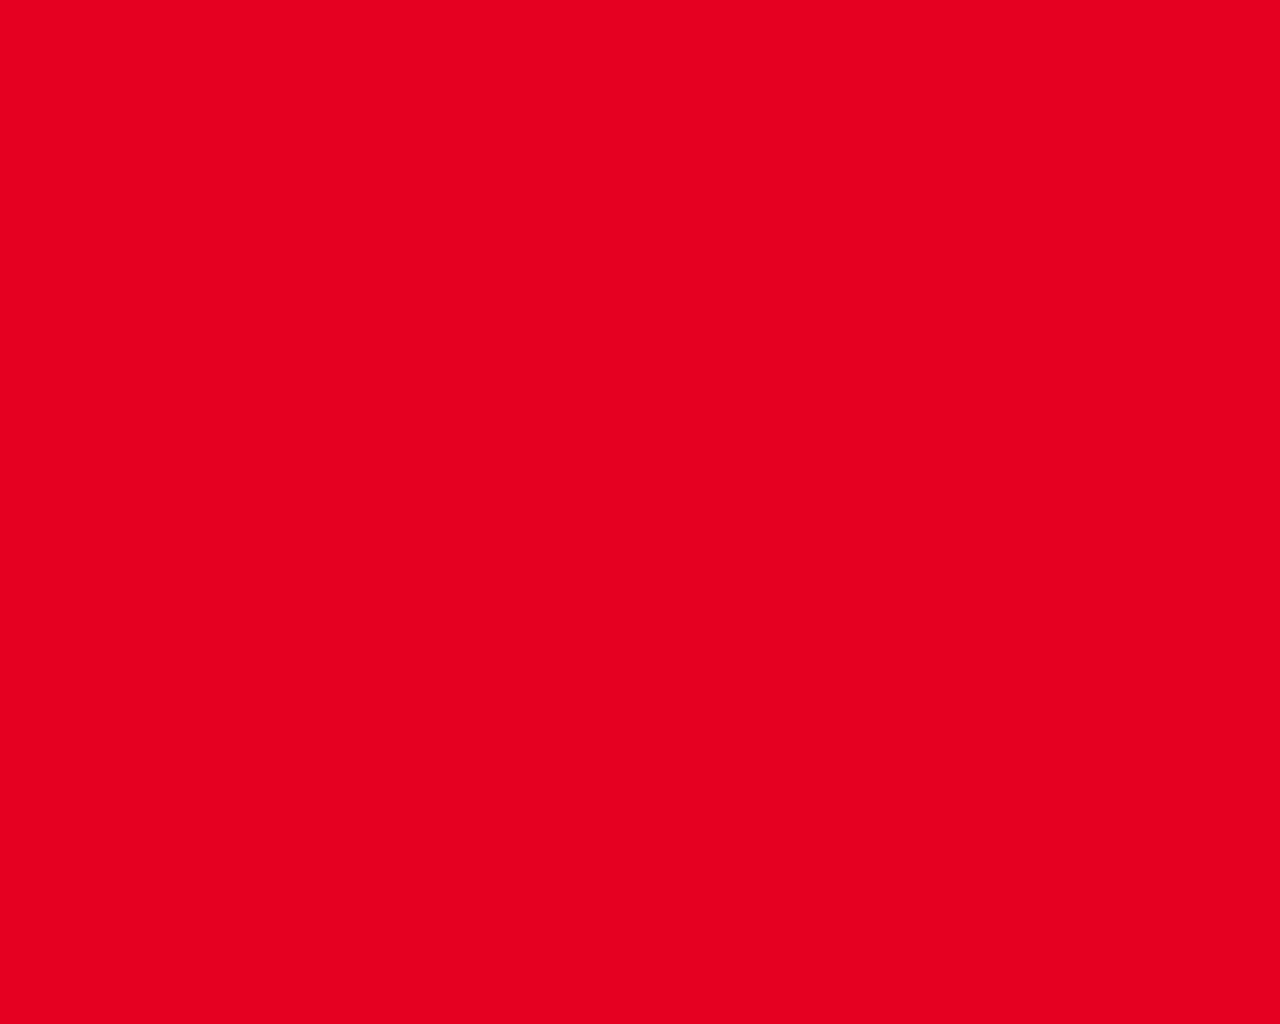 1280x1024 Cadmium Red Solid Color Background